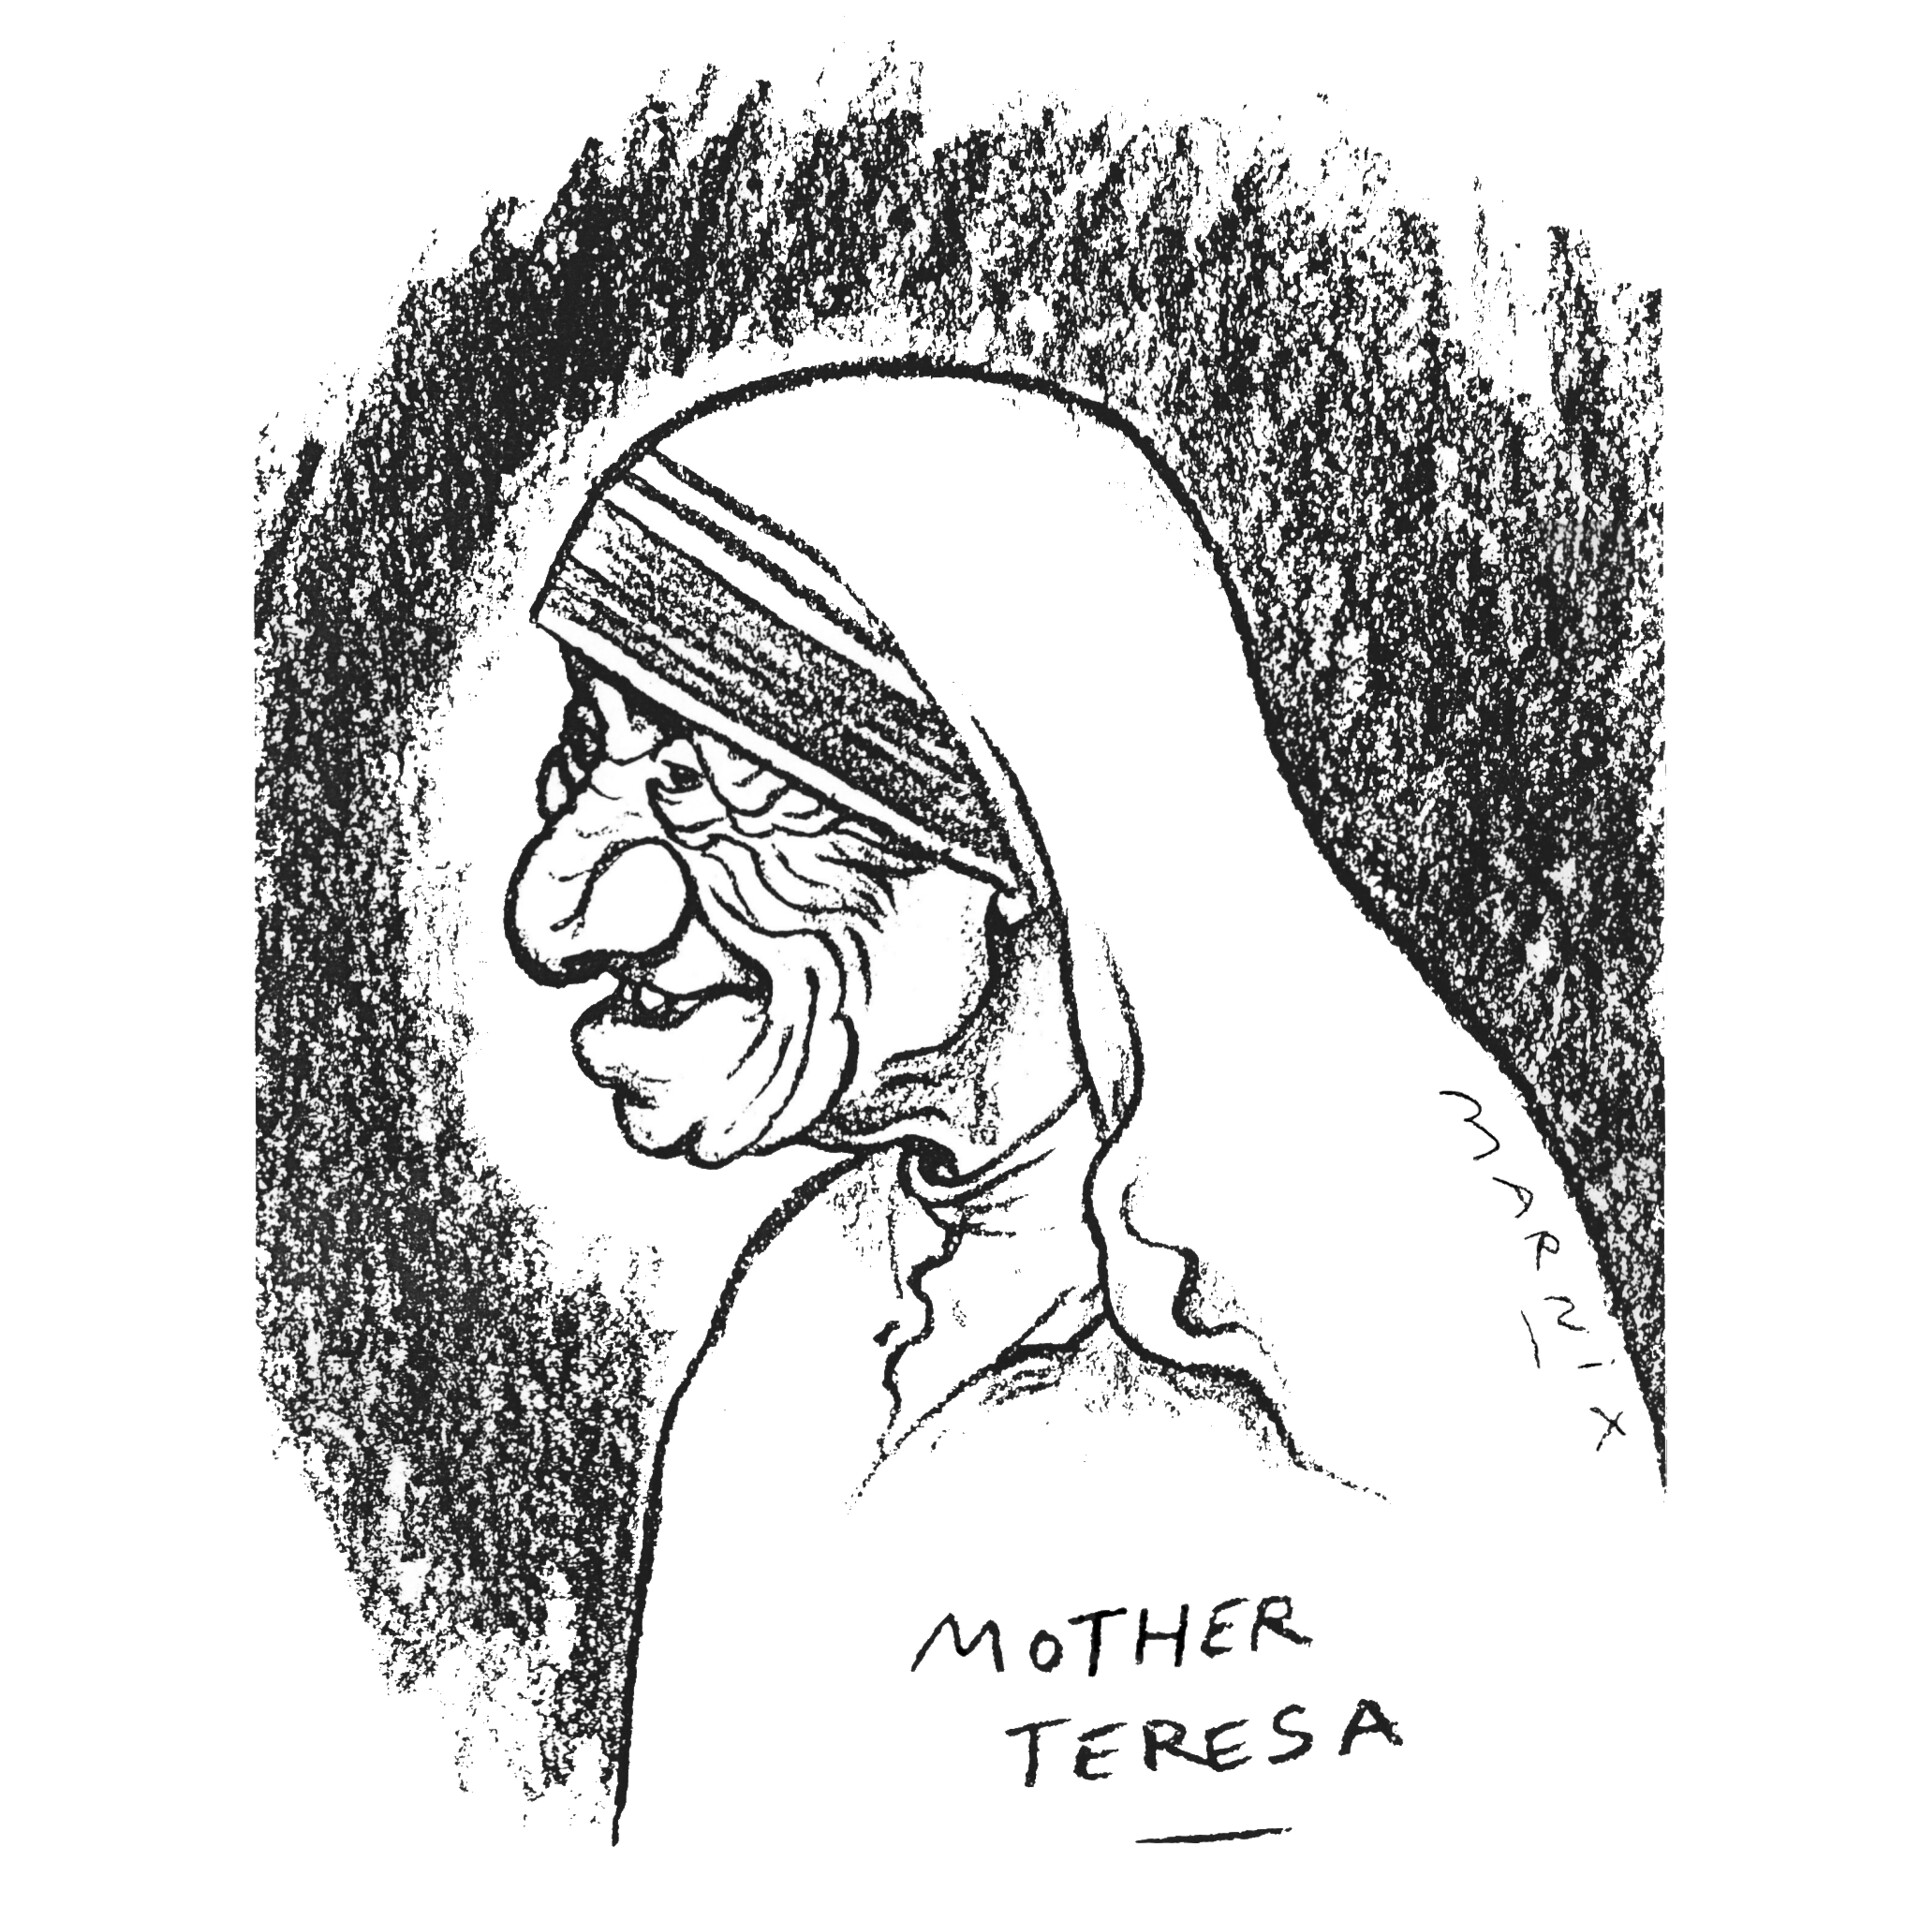 how to draw mother teresa easy line drawing with sketch pen fo beginners  step by step  YouTube